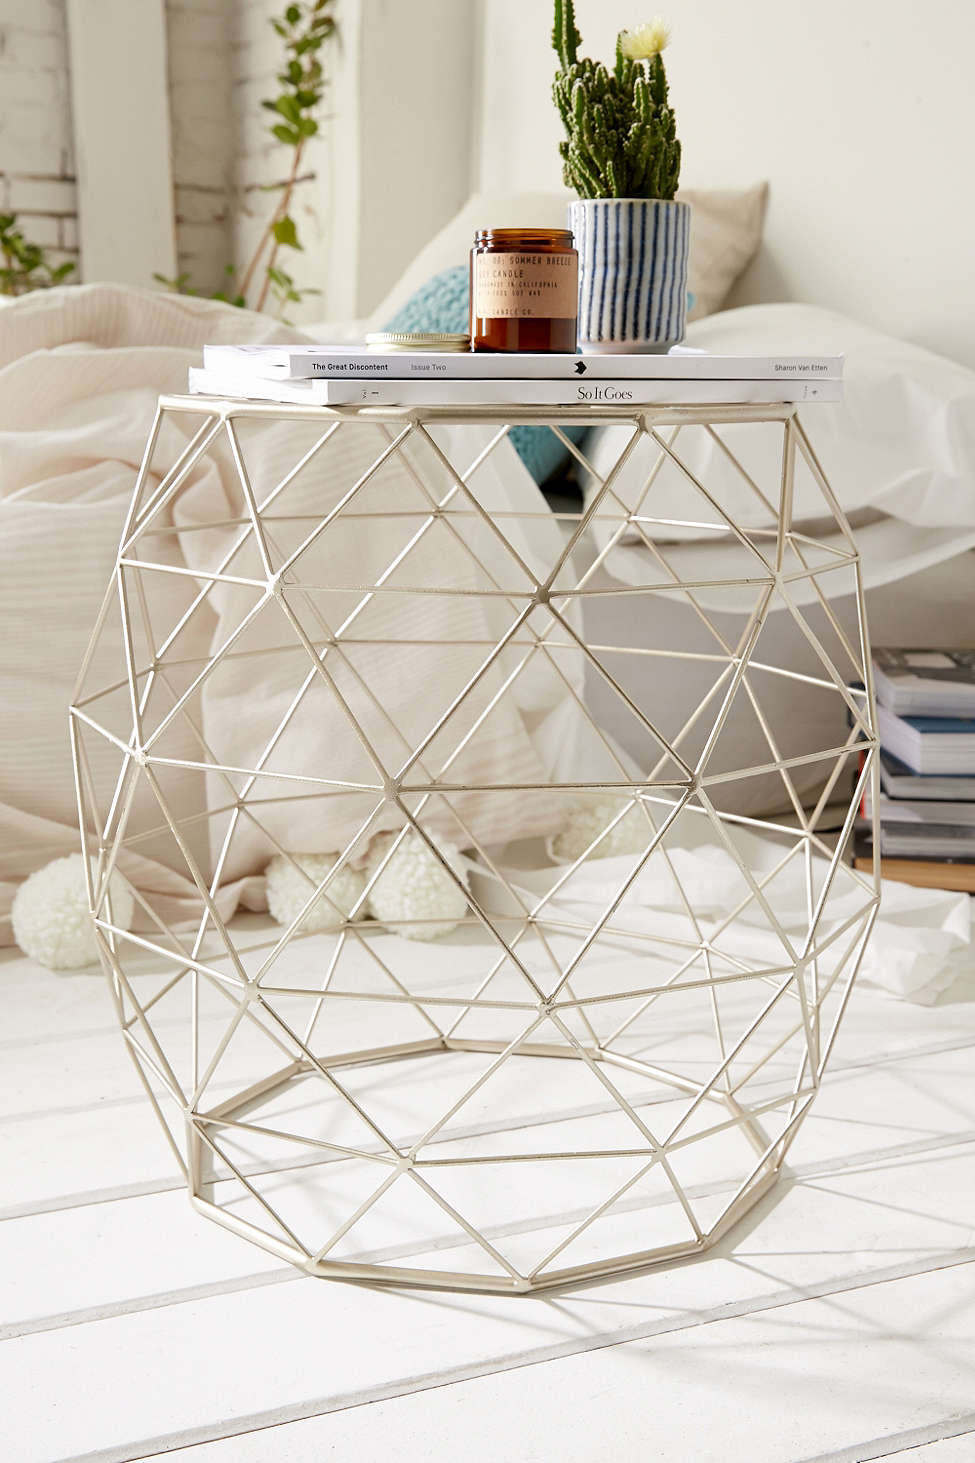 https://kpfusion.com/wp-content/uploads/2015/06/Urban-Outfitters-Geometric-Metal-Side-Table.jpg